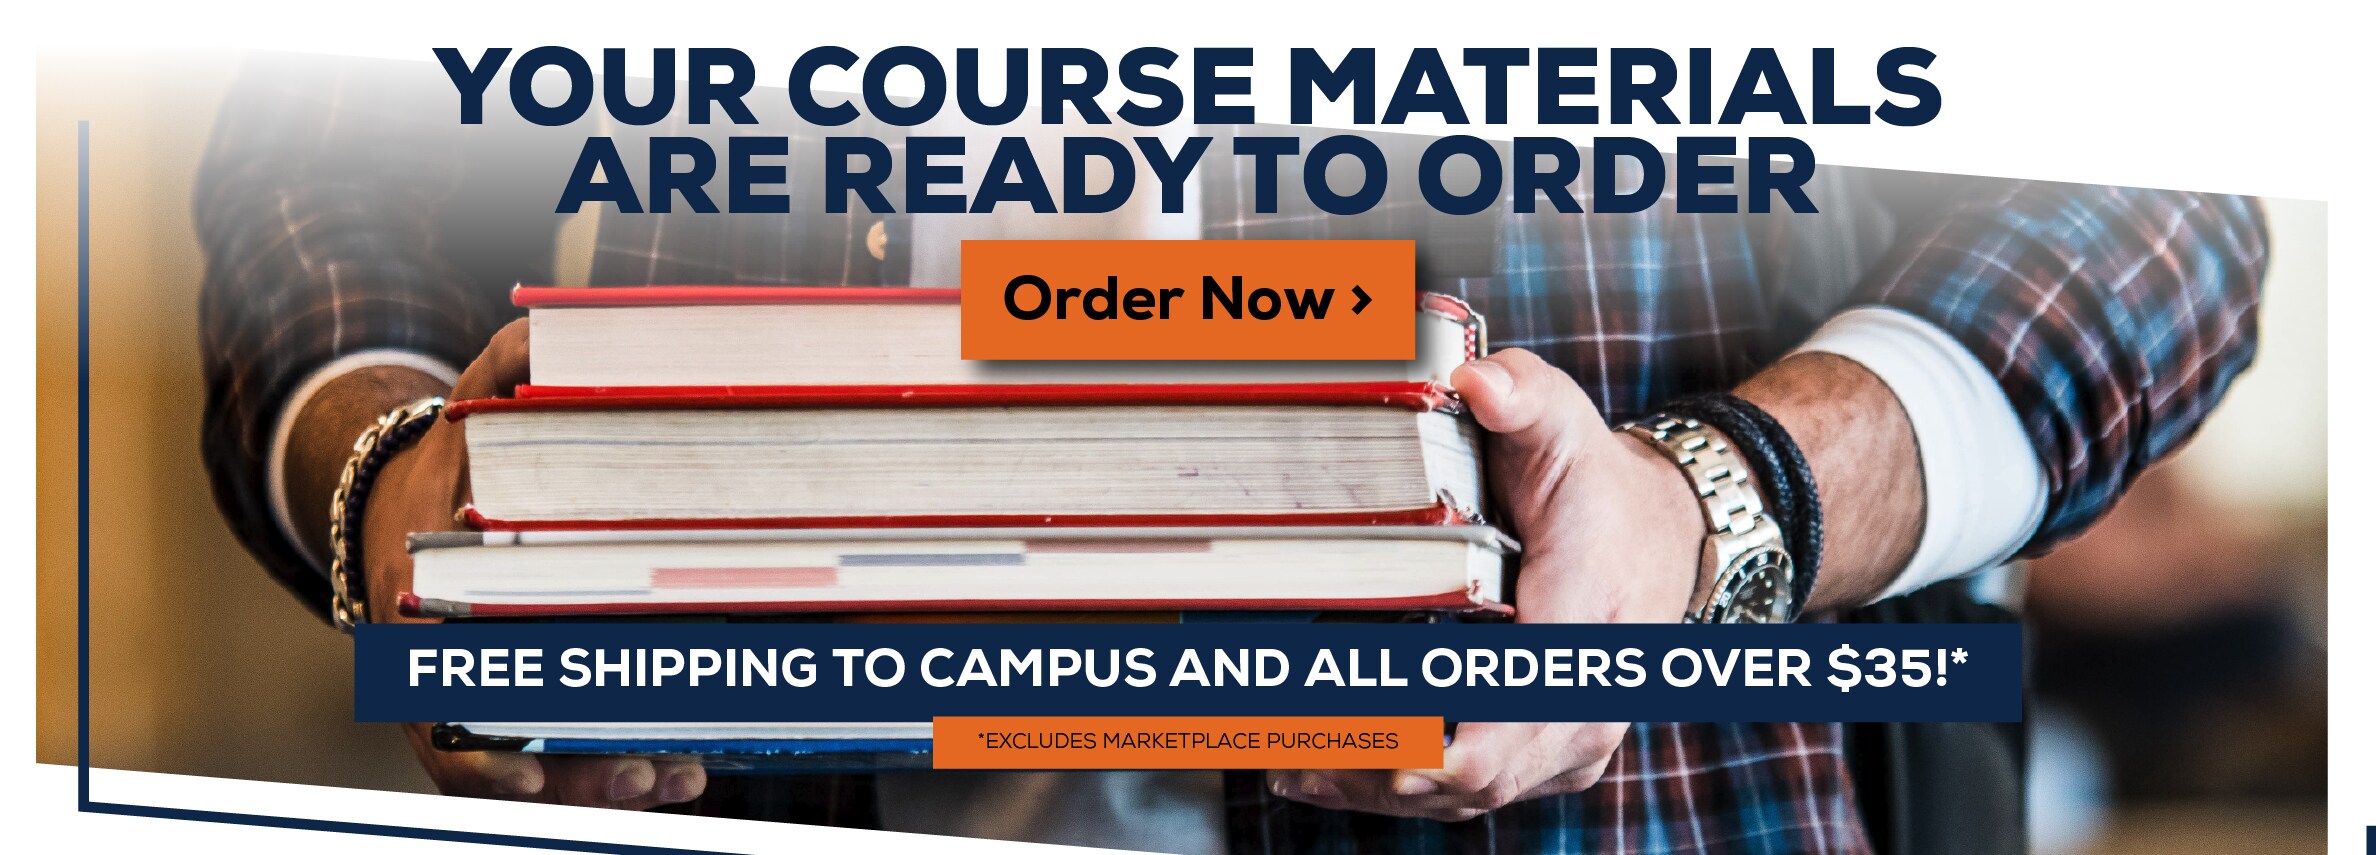 Your Course Materials are Ready to Order. Order Now. Free shipping on orders over $35! *Excludes marketplace purchases.